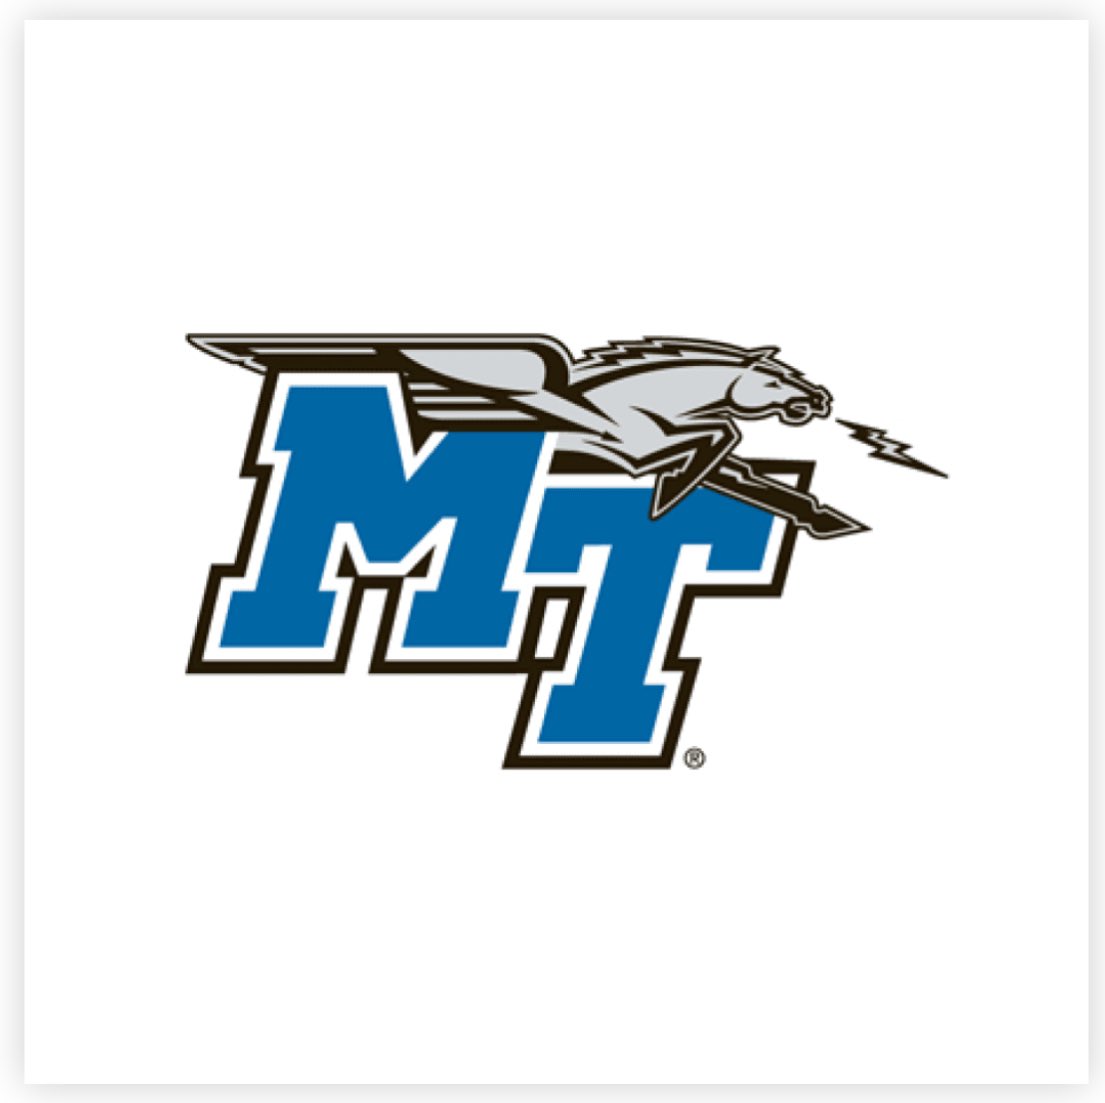 #AGTG I'm blessed to say I have earned an offer from @MT_FB. Also thanks for having me and congrats on the big win!! @EnsworthFB @OnTopAthletics @thompsmd23 @CoachRoyston_MT @CoachRocBatten @CoachDSharp2 @SWiltfong247 @d1highlights